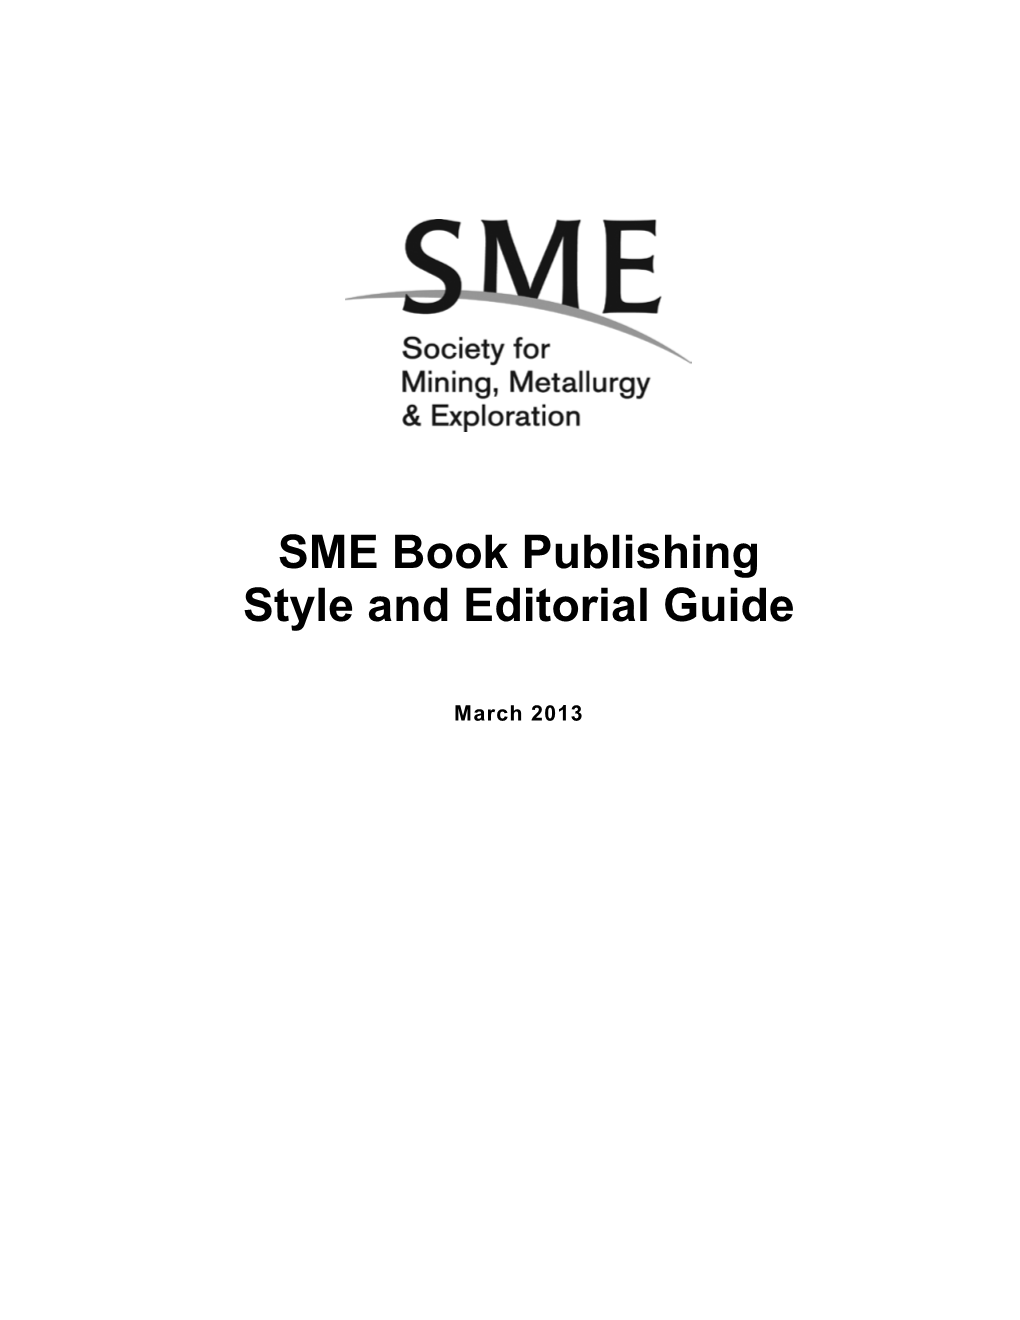 SME Book Publishing Style and Editorial Guide